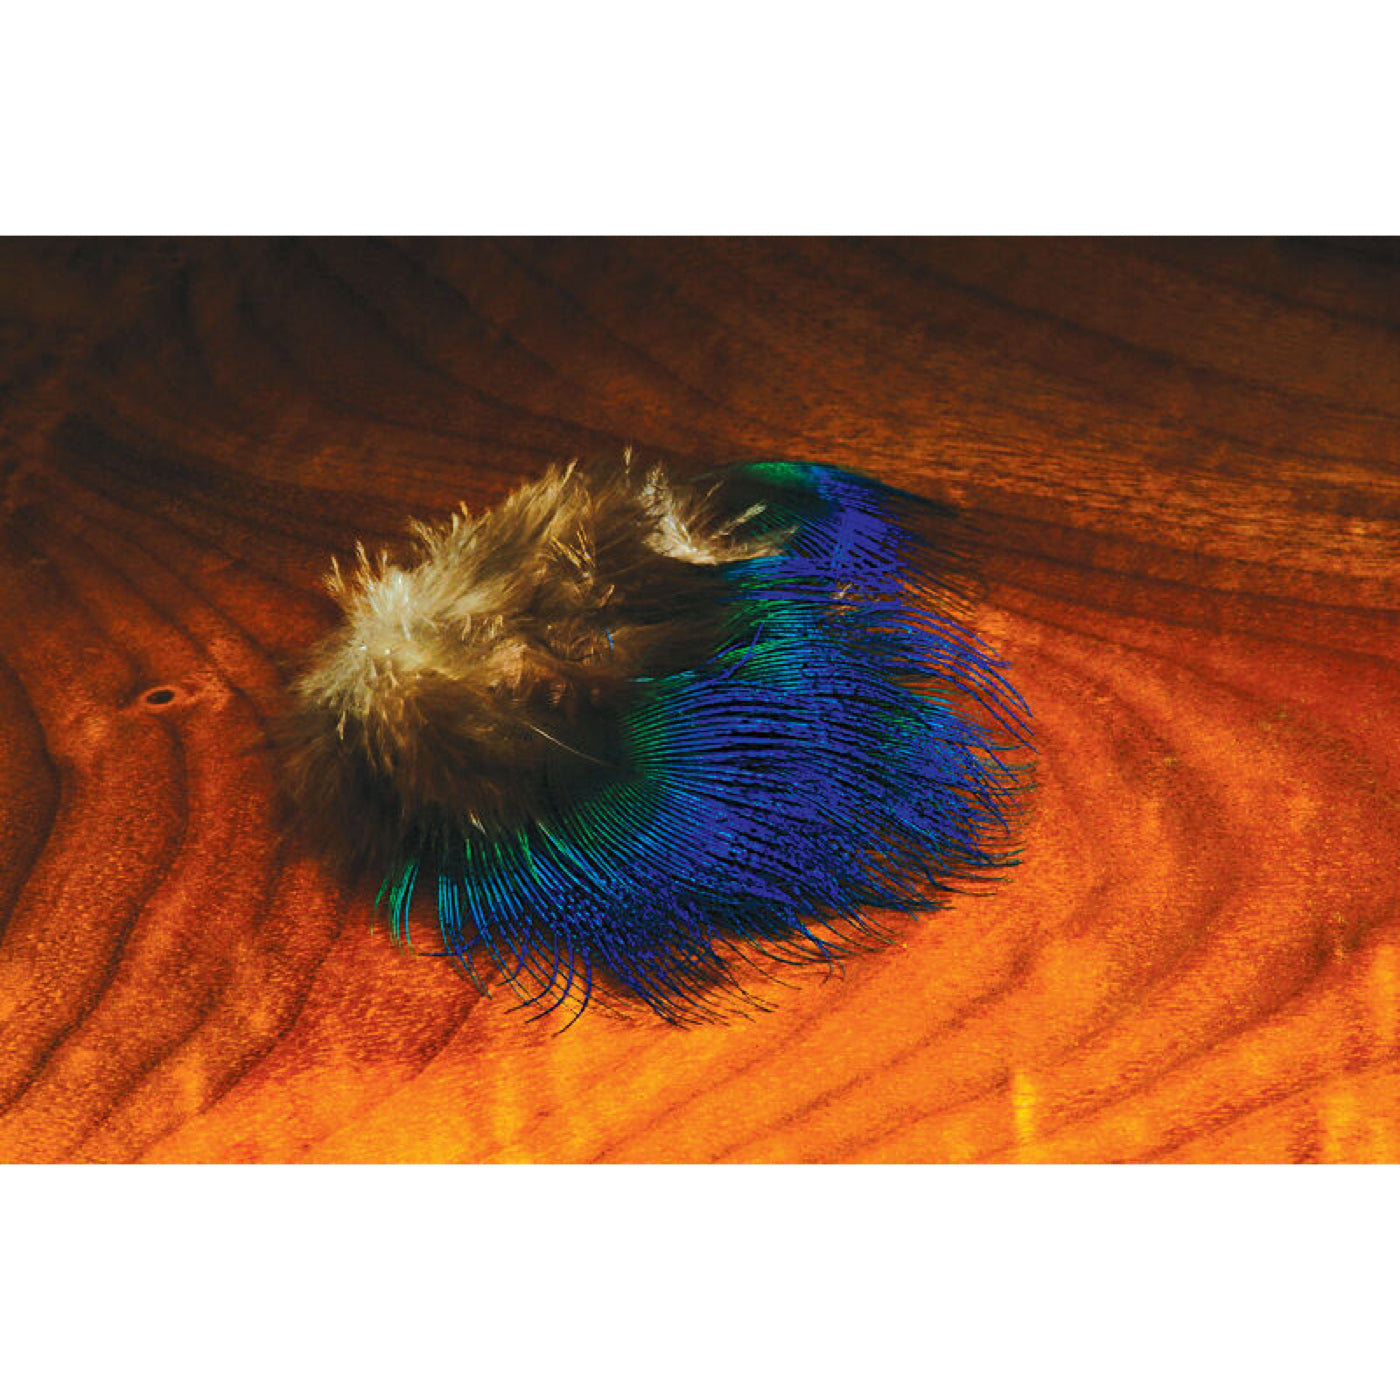 Hareline Peacock Sword: Fly Tying Feathers Supplies Materials